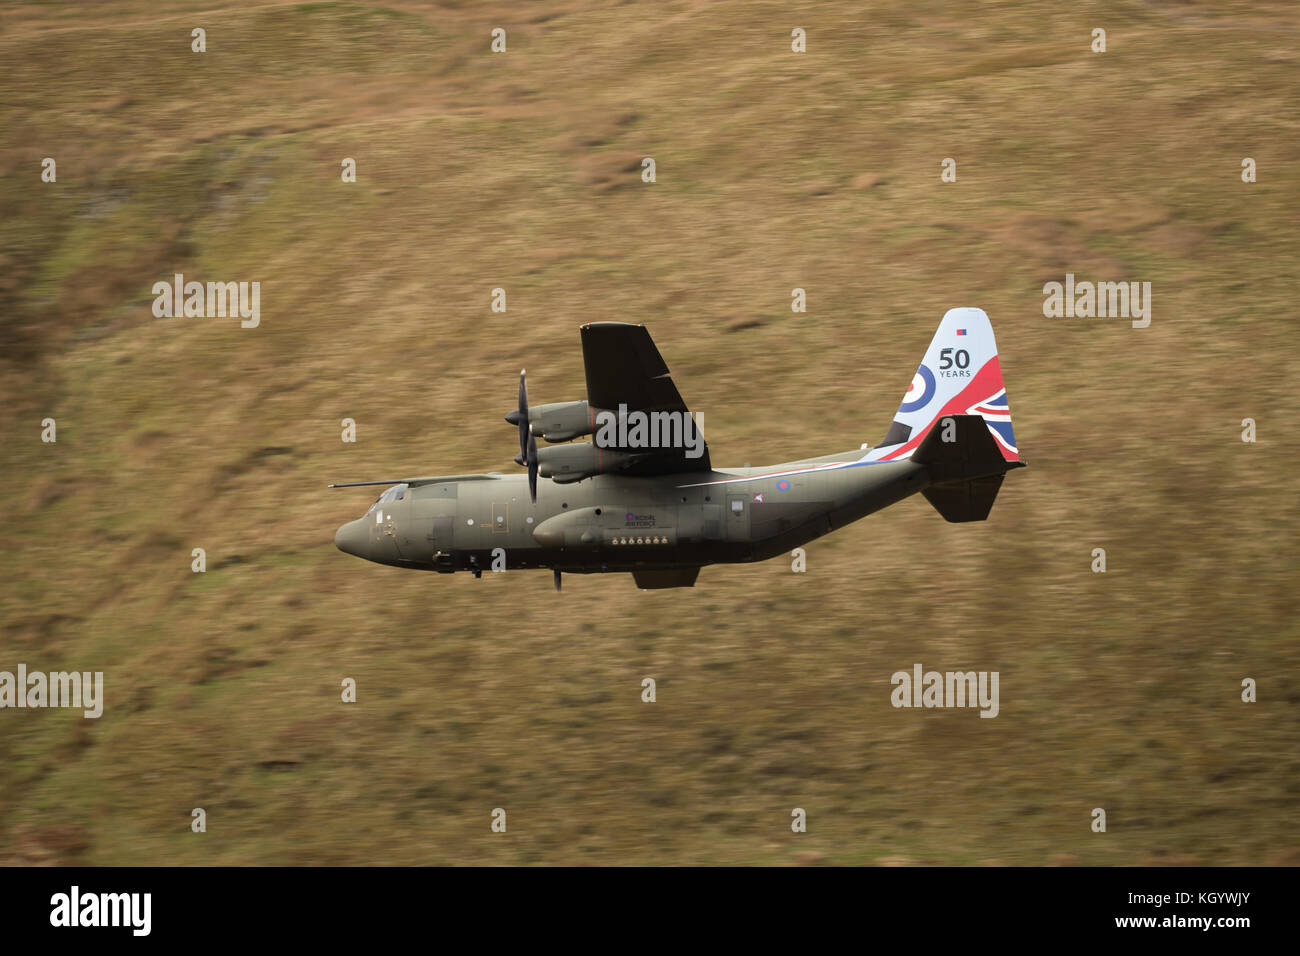 Royal Air Force two ship Hercules Flight conducting low flying training sortie in Snowdonia. Stock Photo